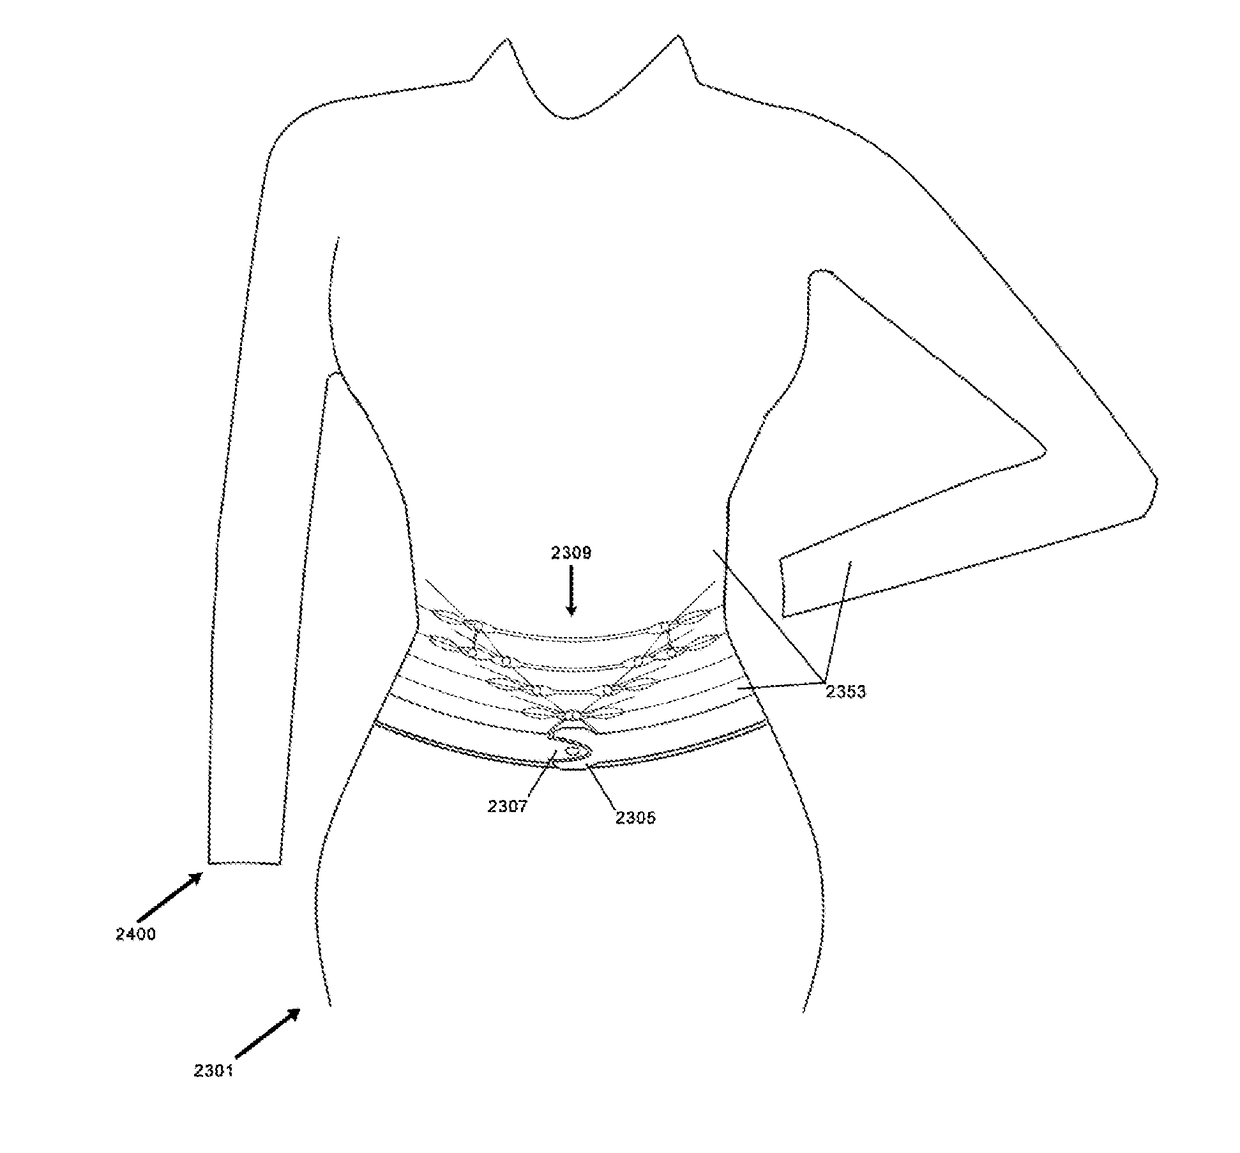 Self-Fitting Apparel with Cascading Closures